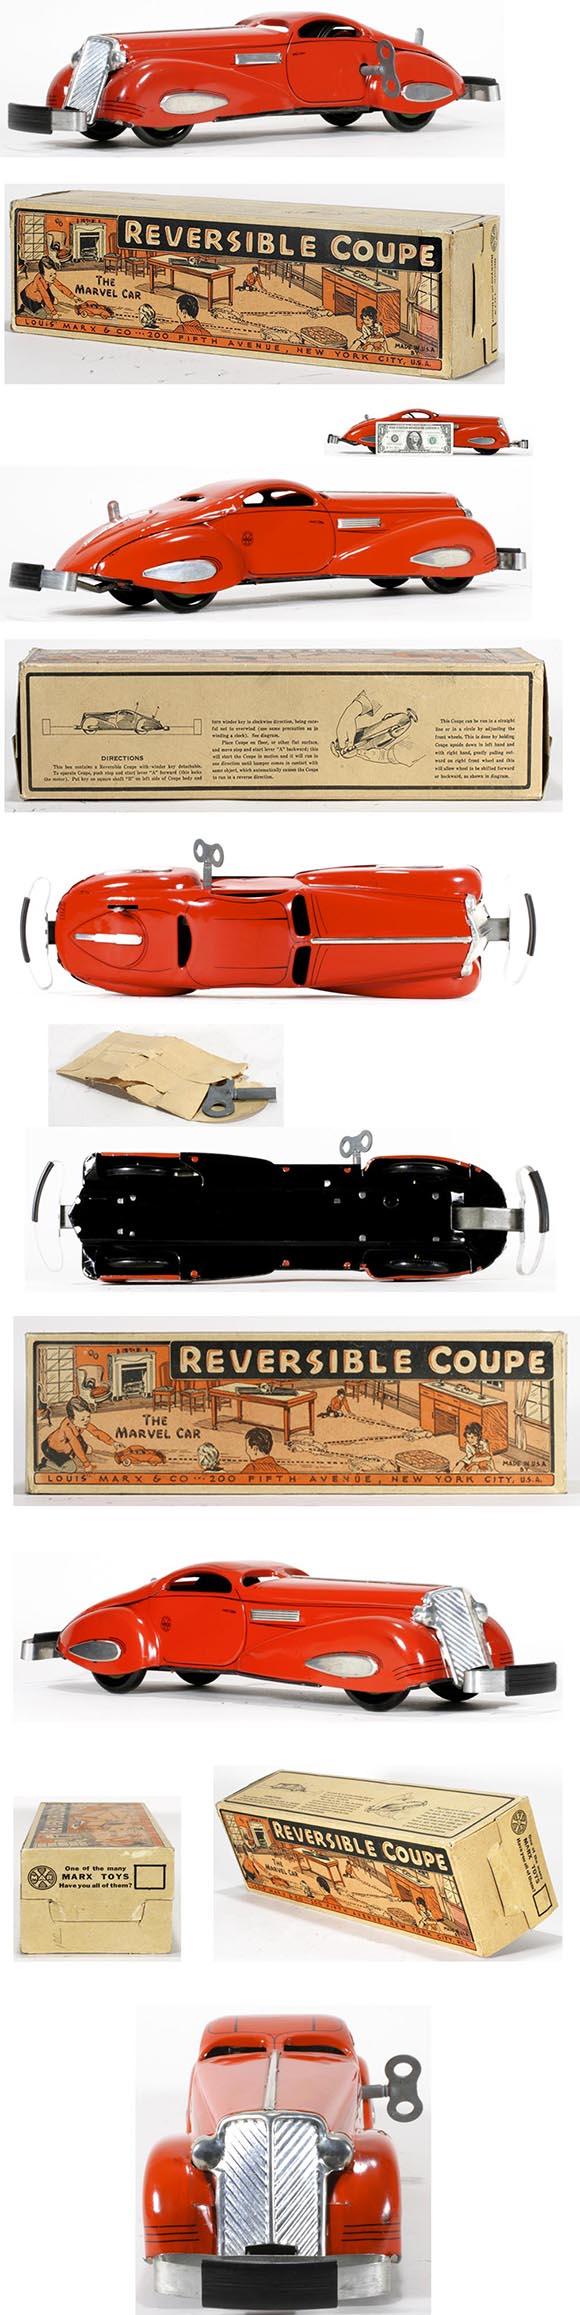 1936 Marx, Reversible Coupe (The Marvel Car) in Original Box